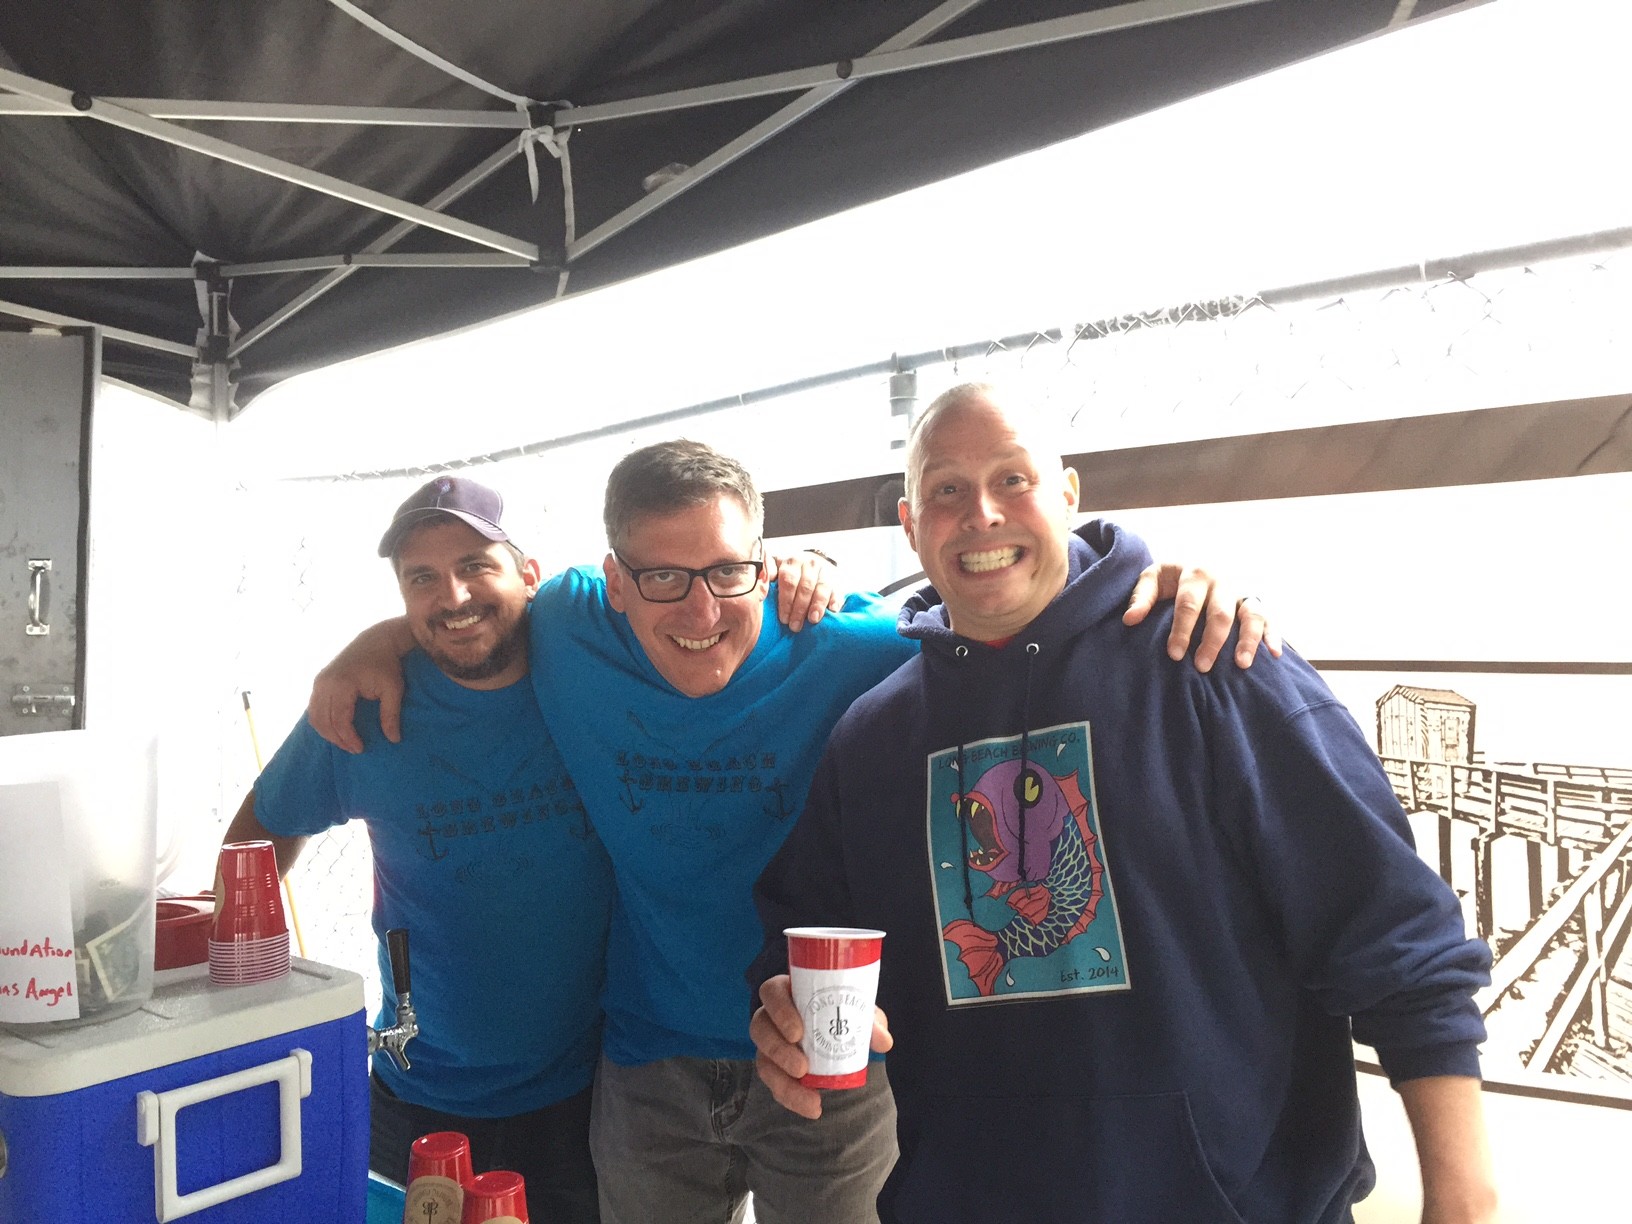 Patrick Harten, left, Brett Blau and Dan Scandiffio served their beer at Unsound’s art show and fundraiser last June.